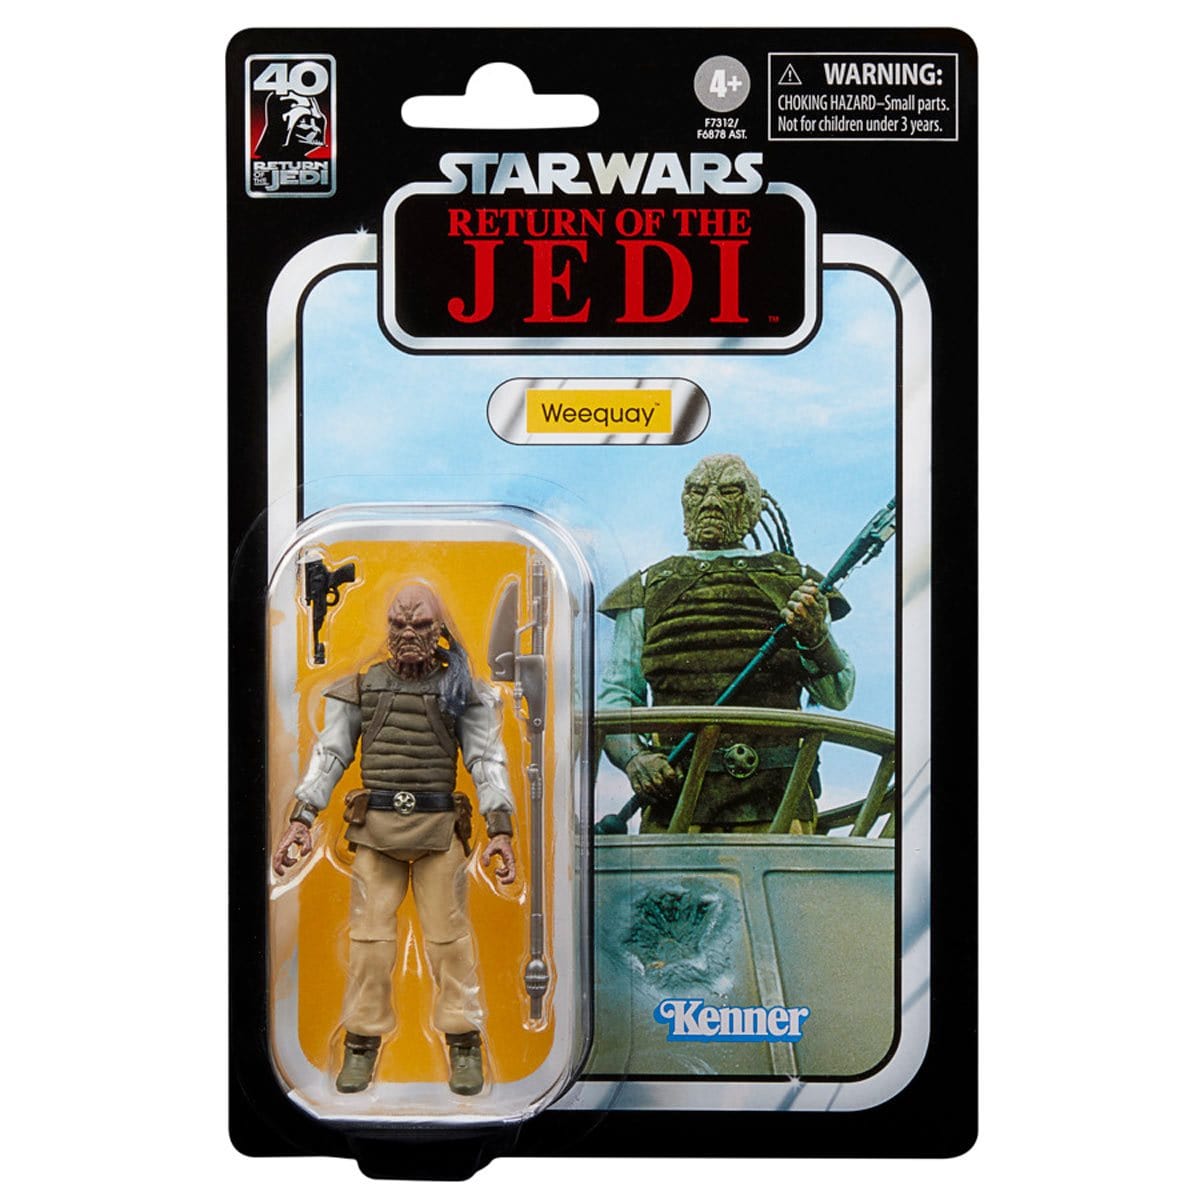 Weequay 3.75-inch Figure - Star Wars The Vintage Collection - Pop-O-Loco - Hasbro